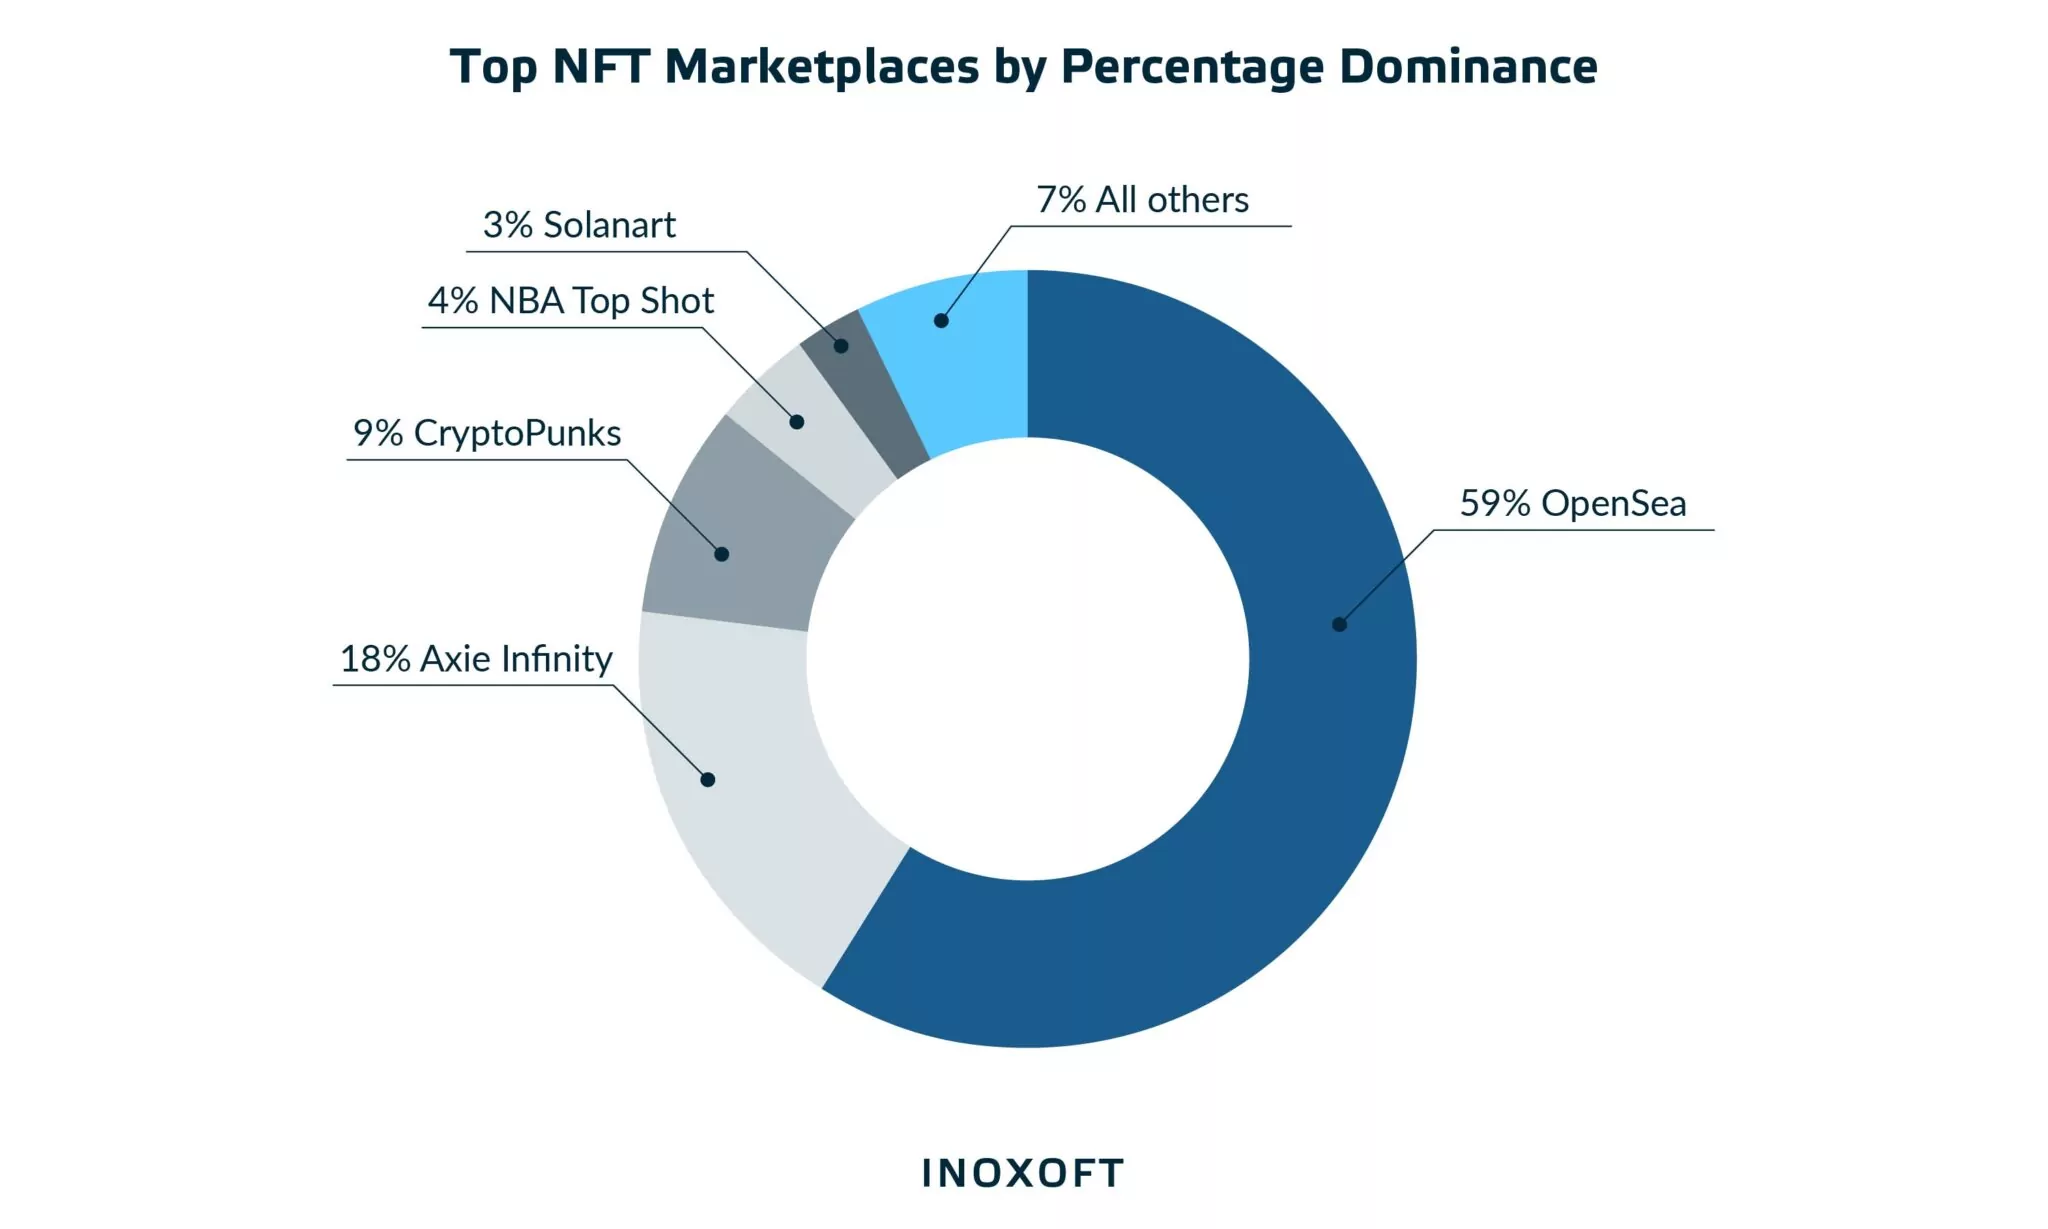 Top NFT marketplaces by percentage dominance